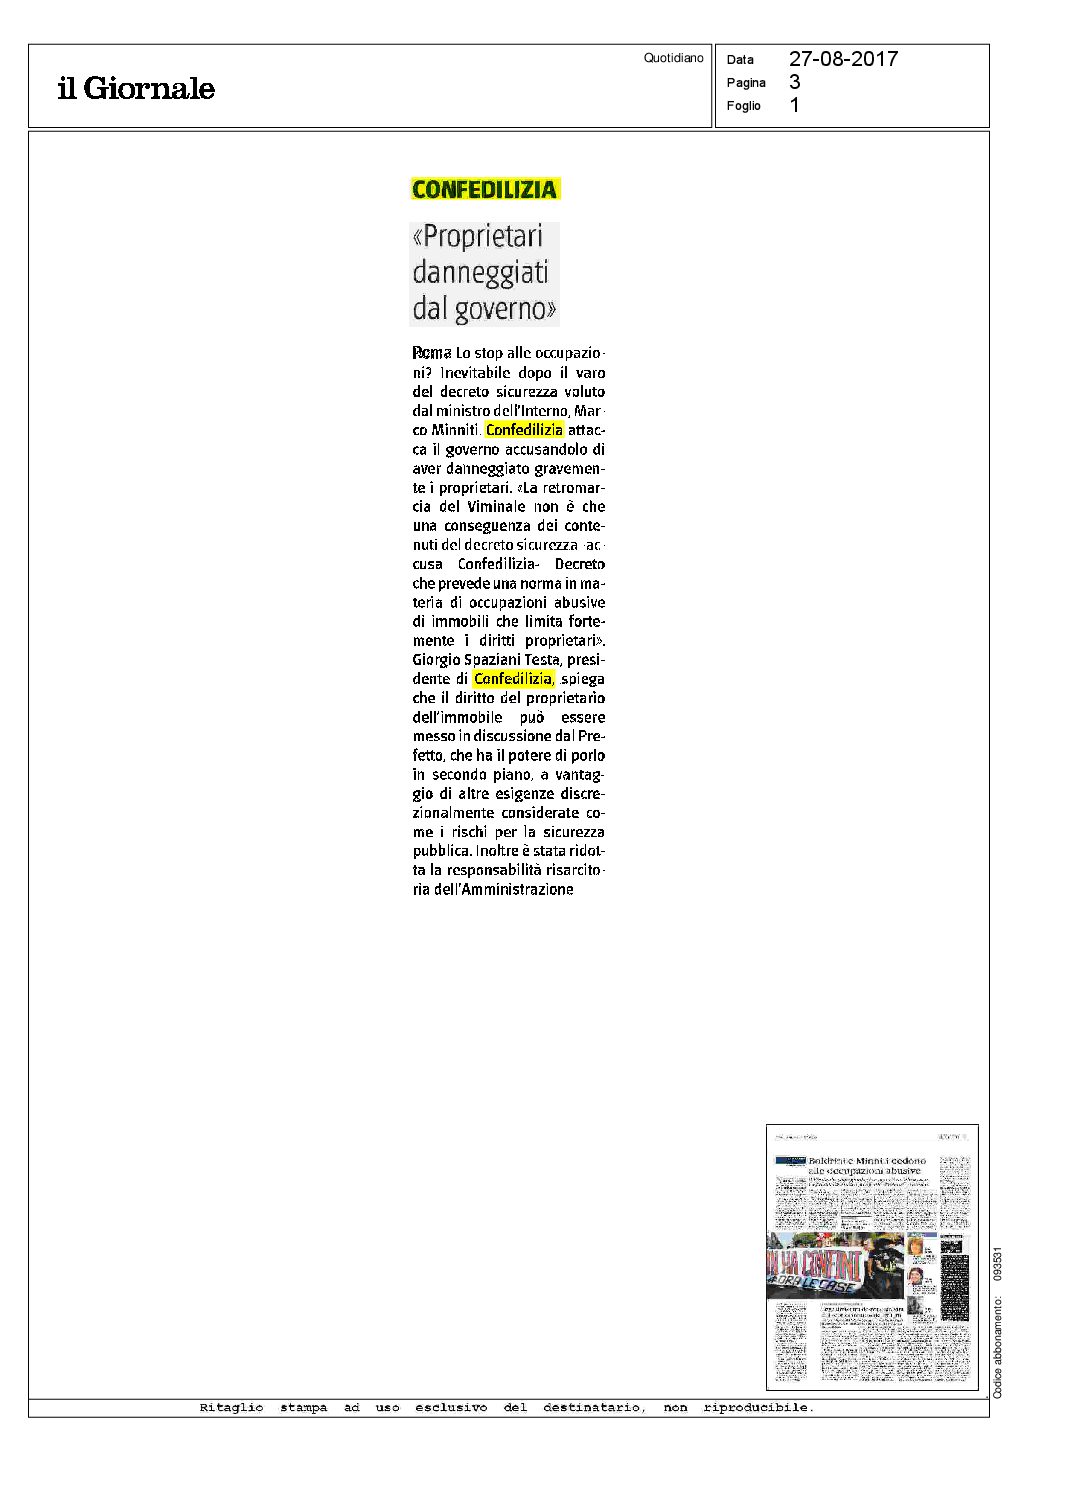 Giornale_27.8.17